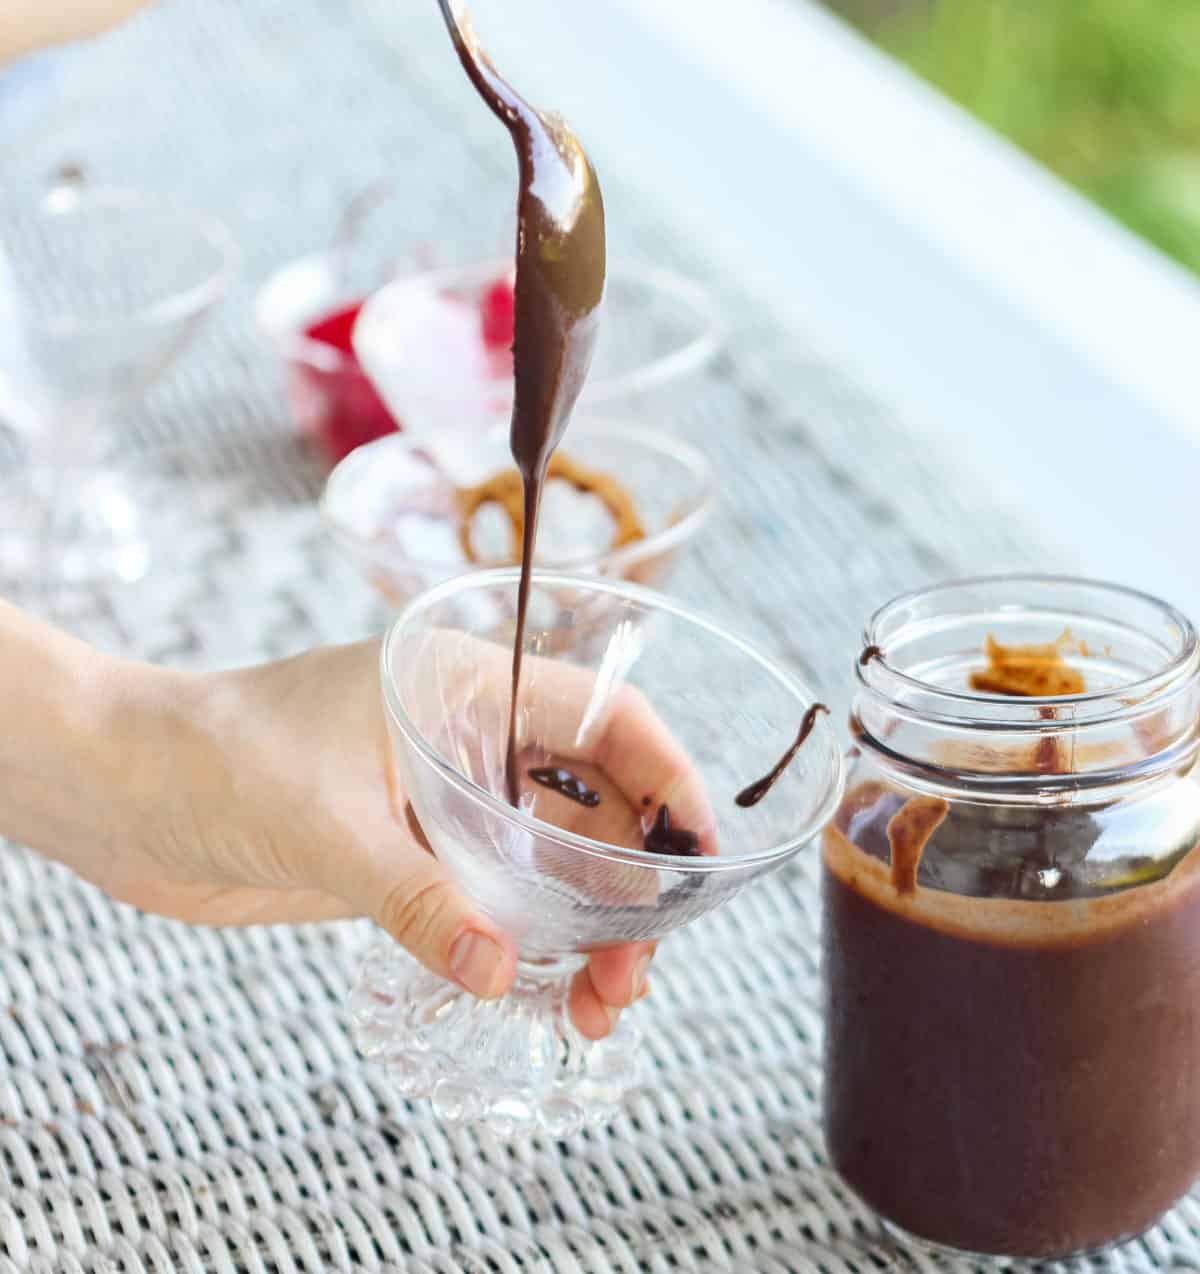 spoon drizzling chocolate sauce into a small glass next to a jar of chocolate sauce on a white wicker table.